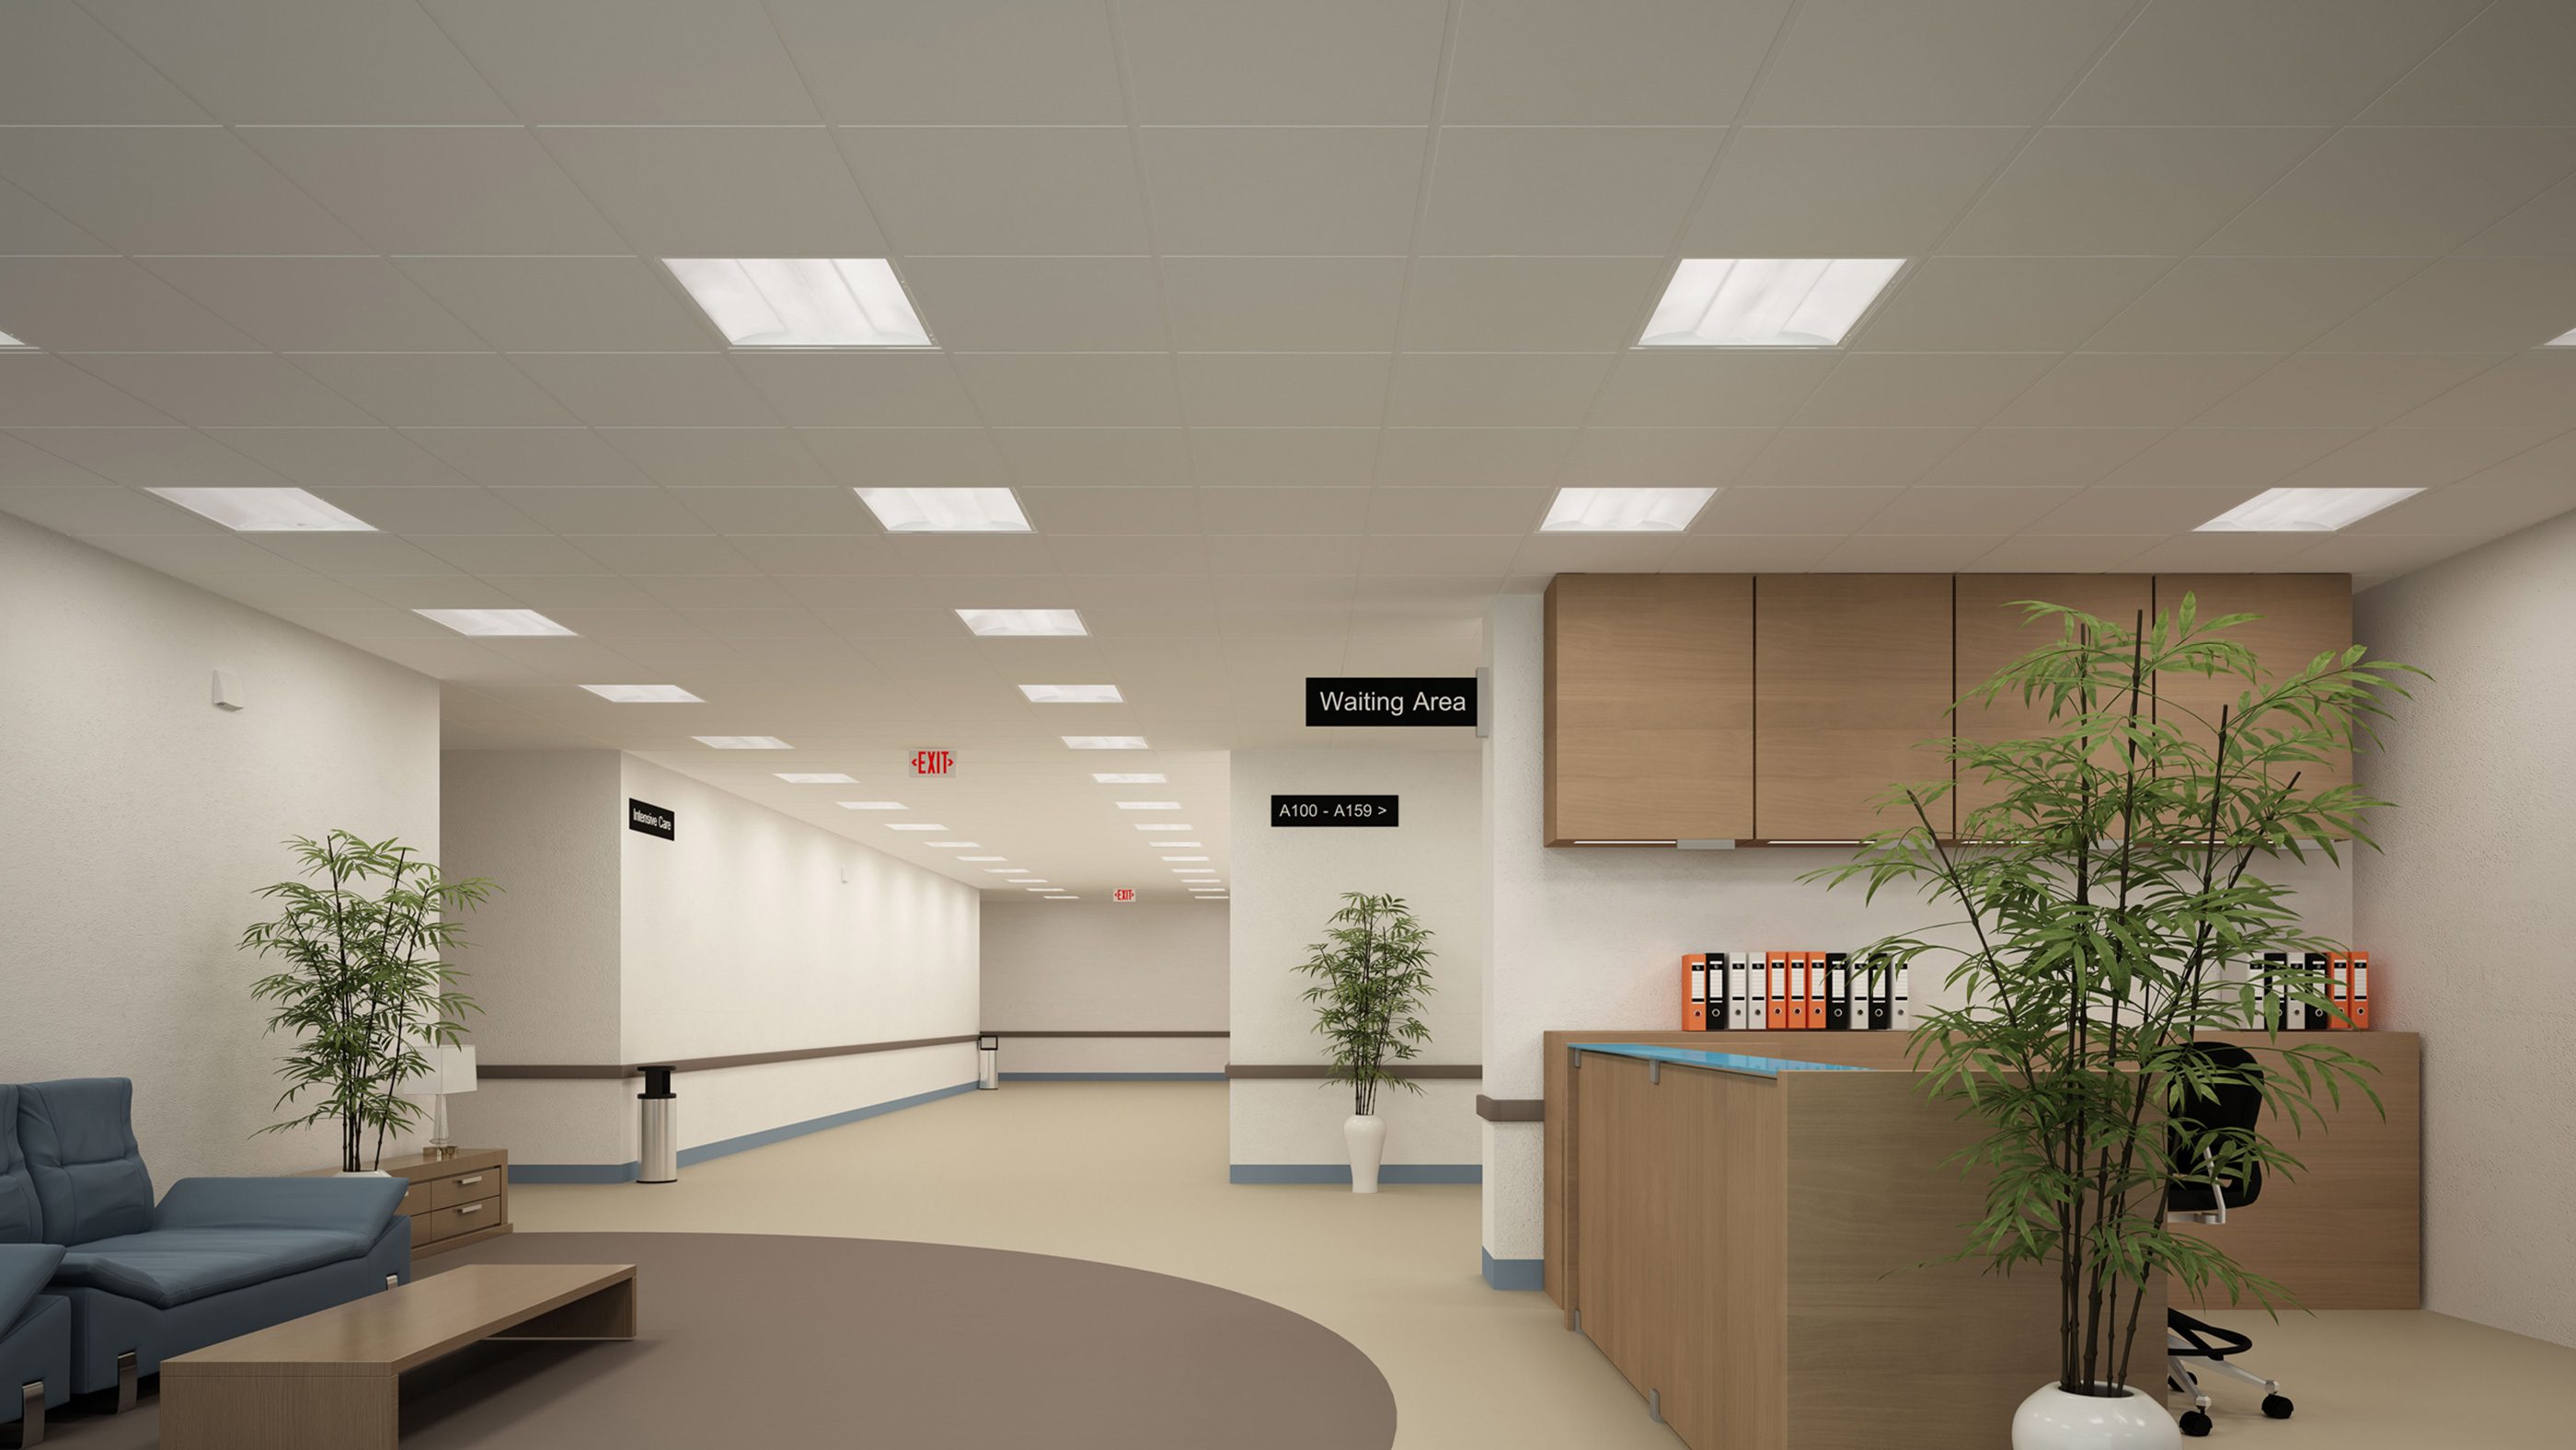 EDG/EDGR. Edge-Lit Exits Lamps Surface and Recessed Mount LED. by